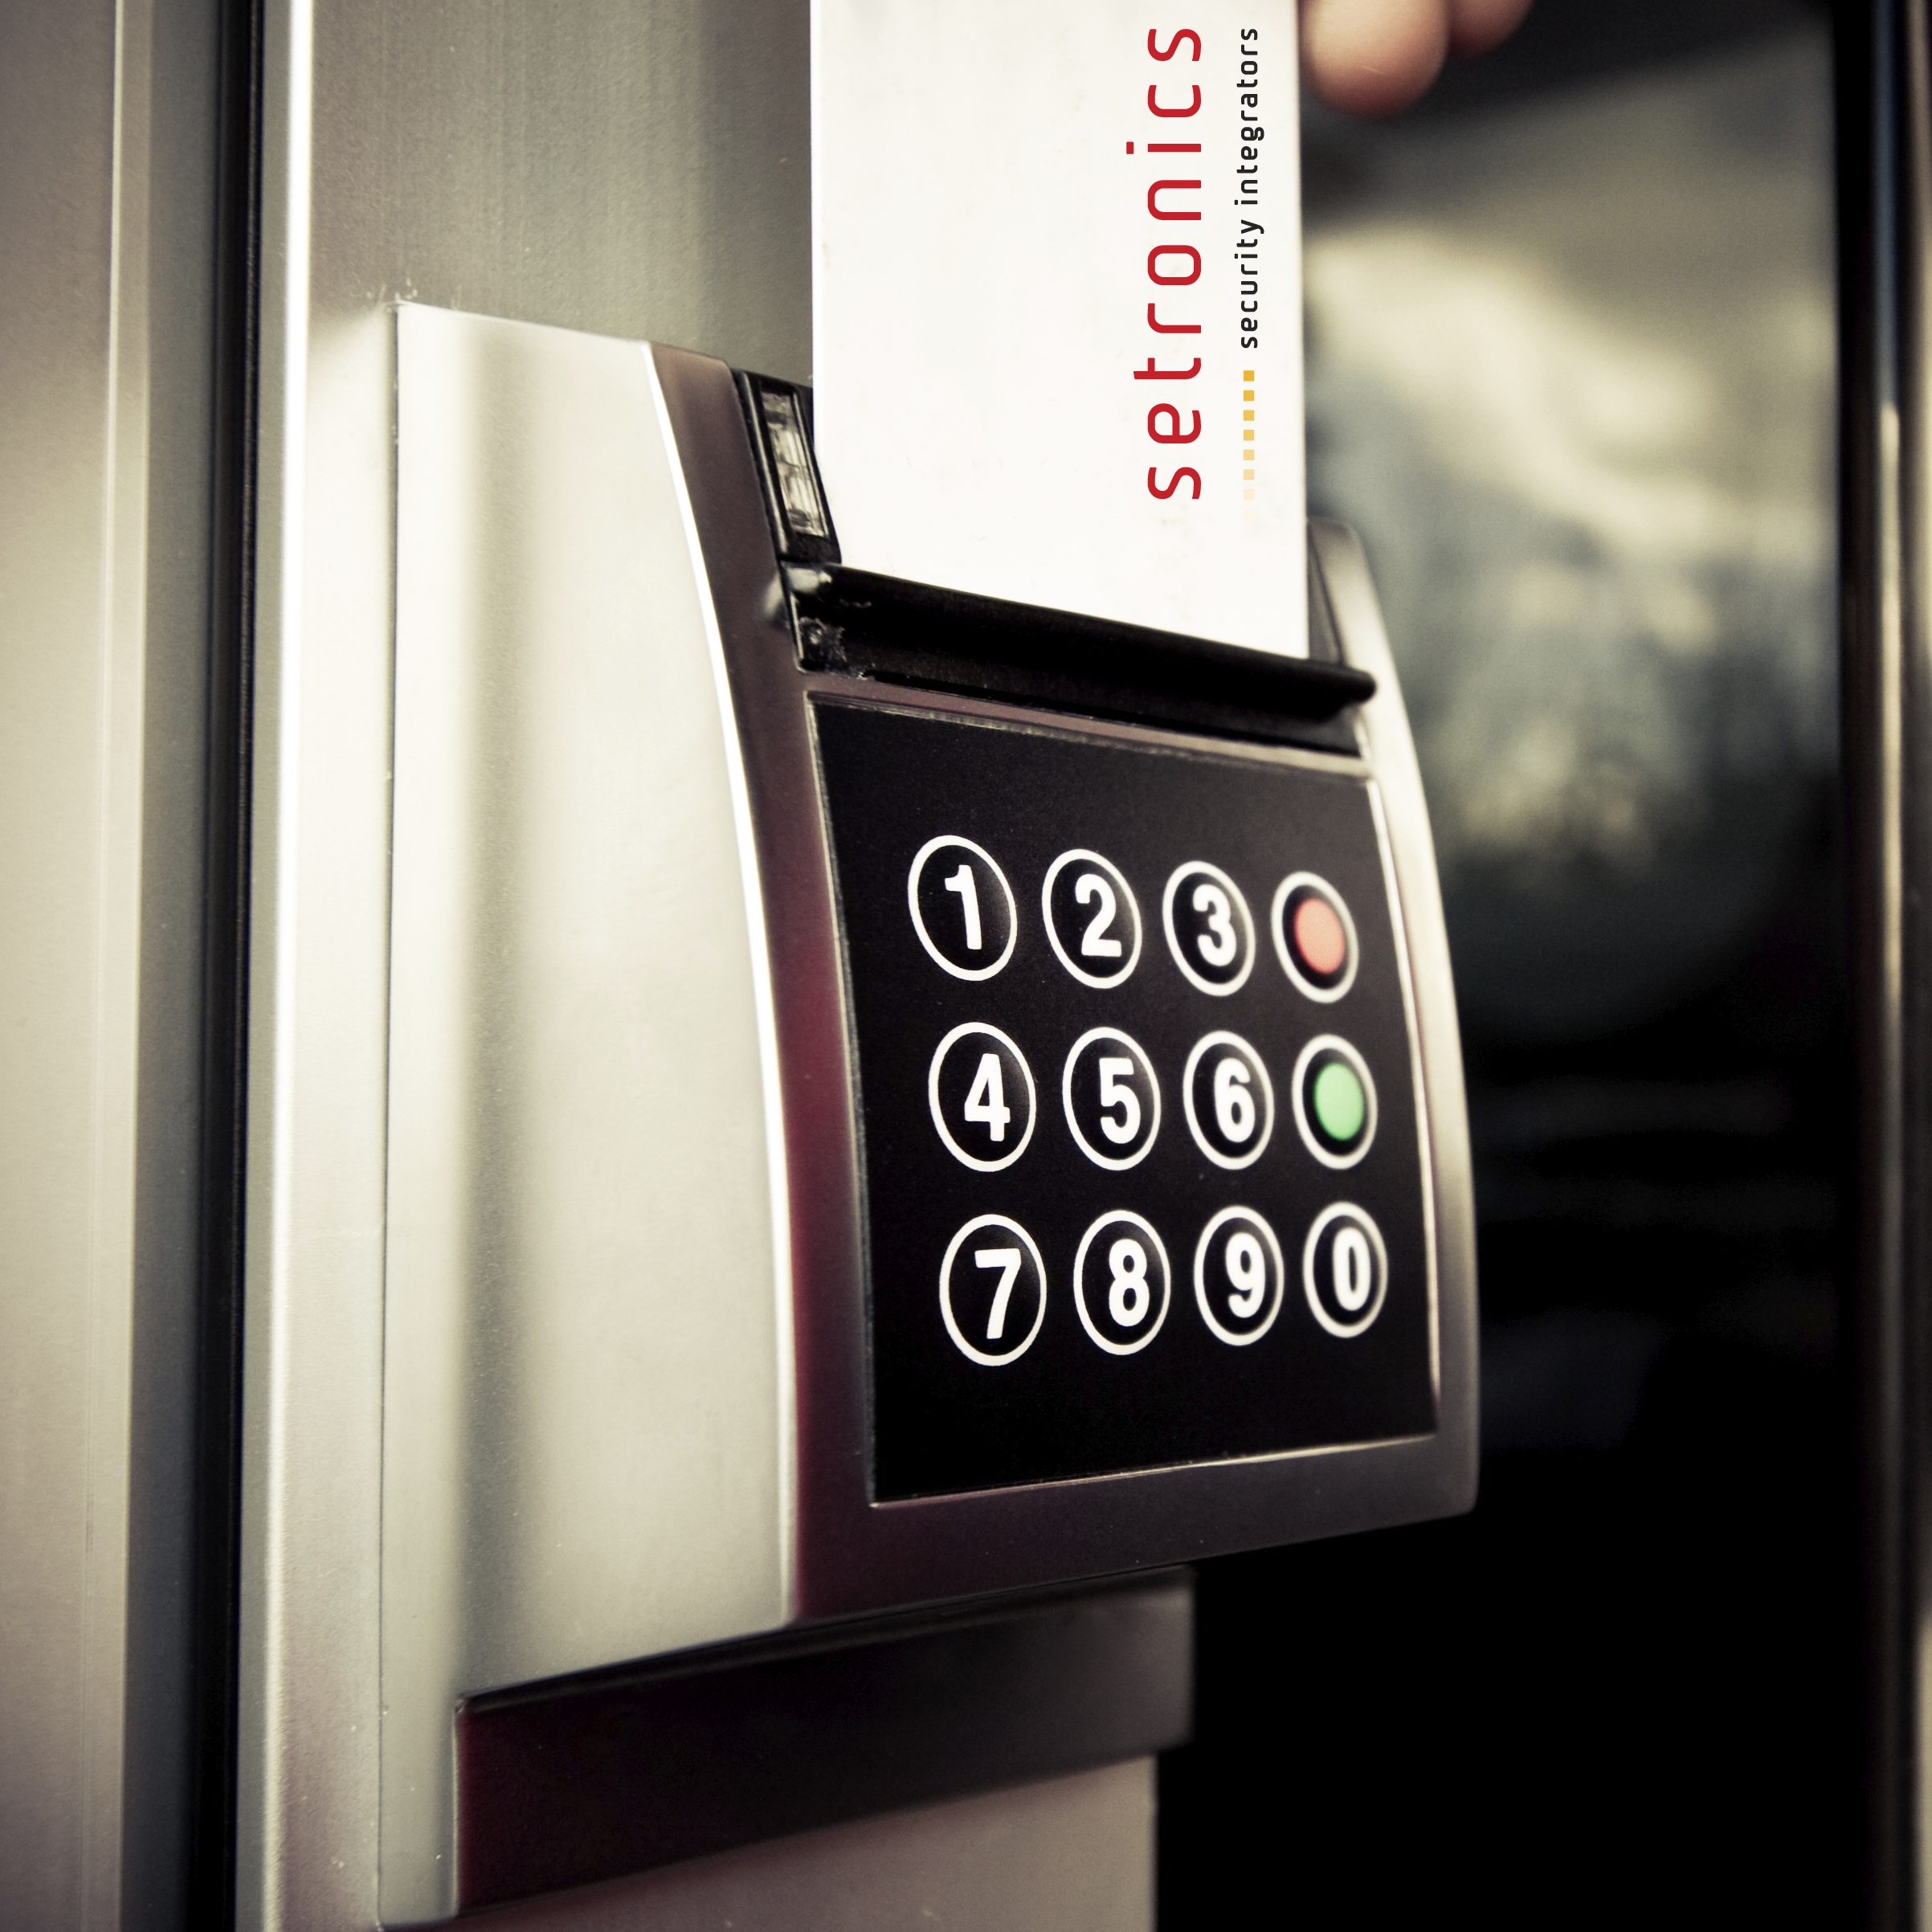 Keypad for security access control.